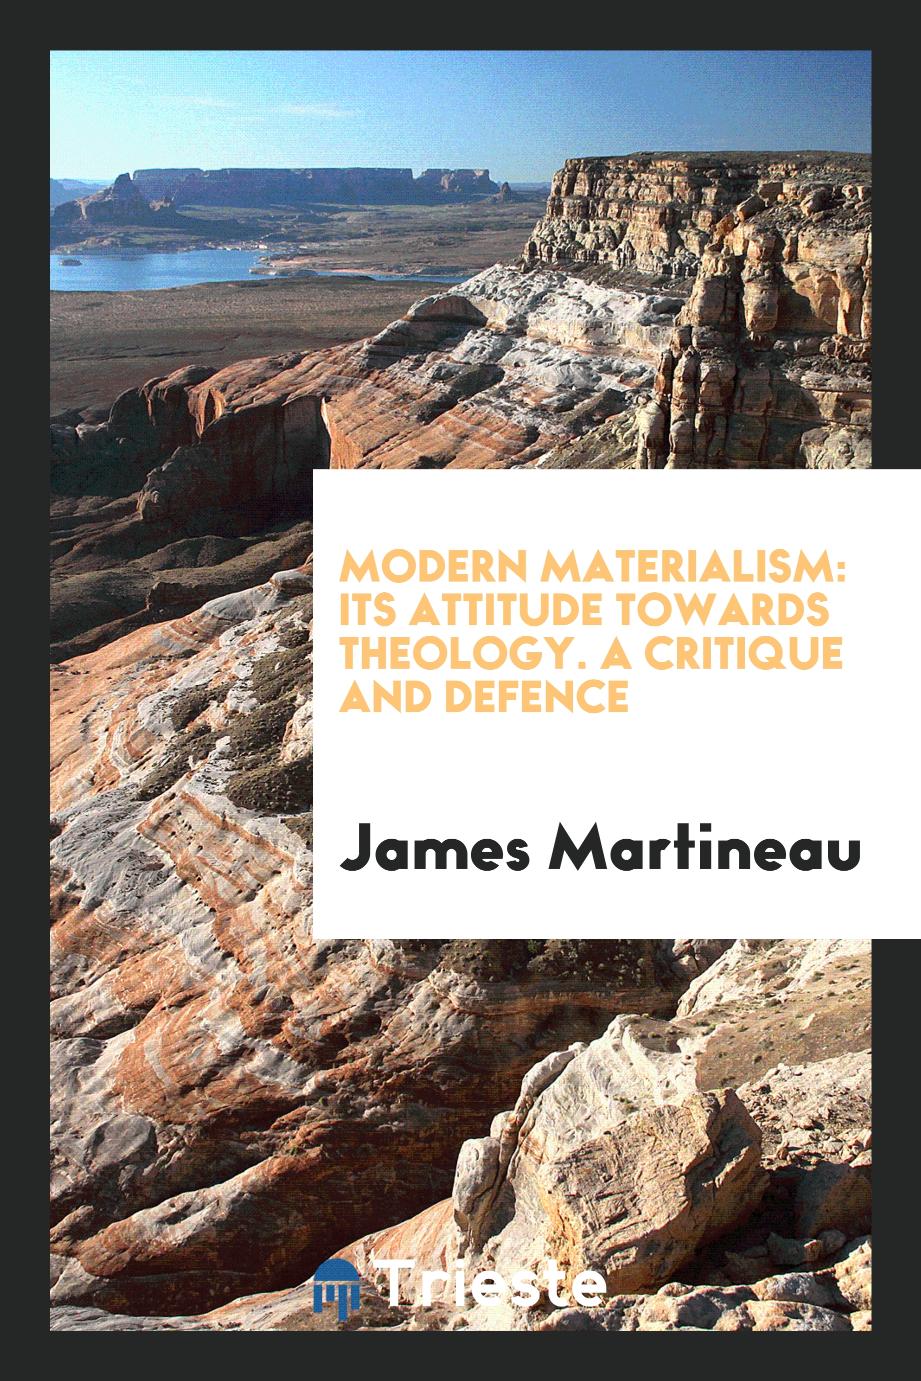 Modern Materialism: Its Attitude Towards Theology. A Critique and Defence